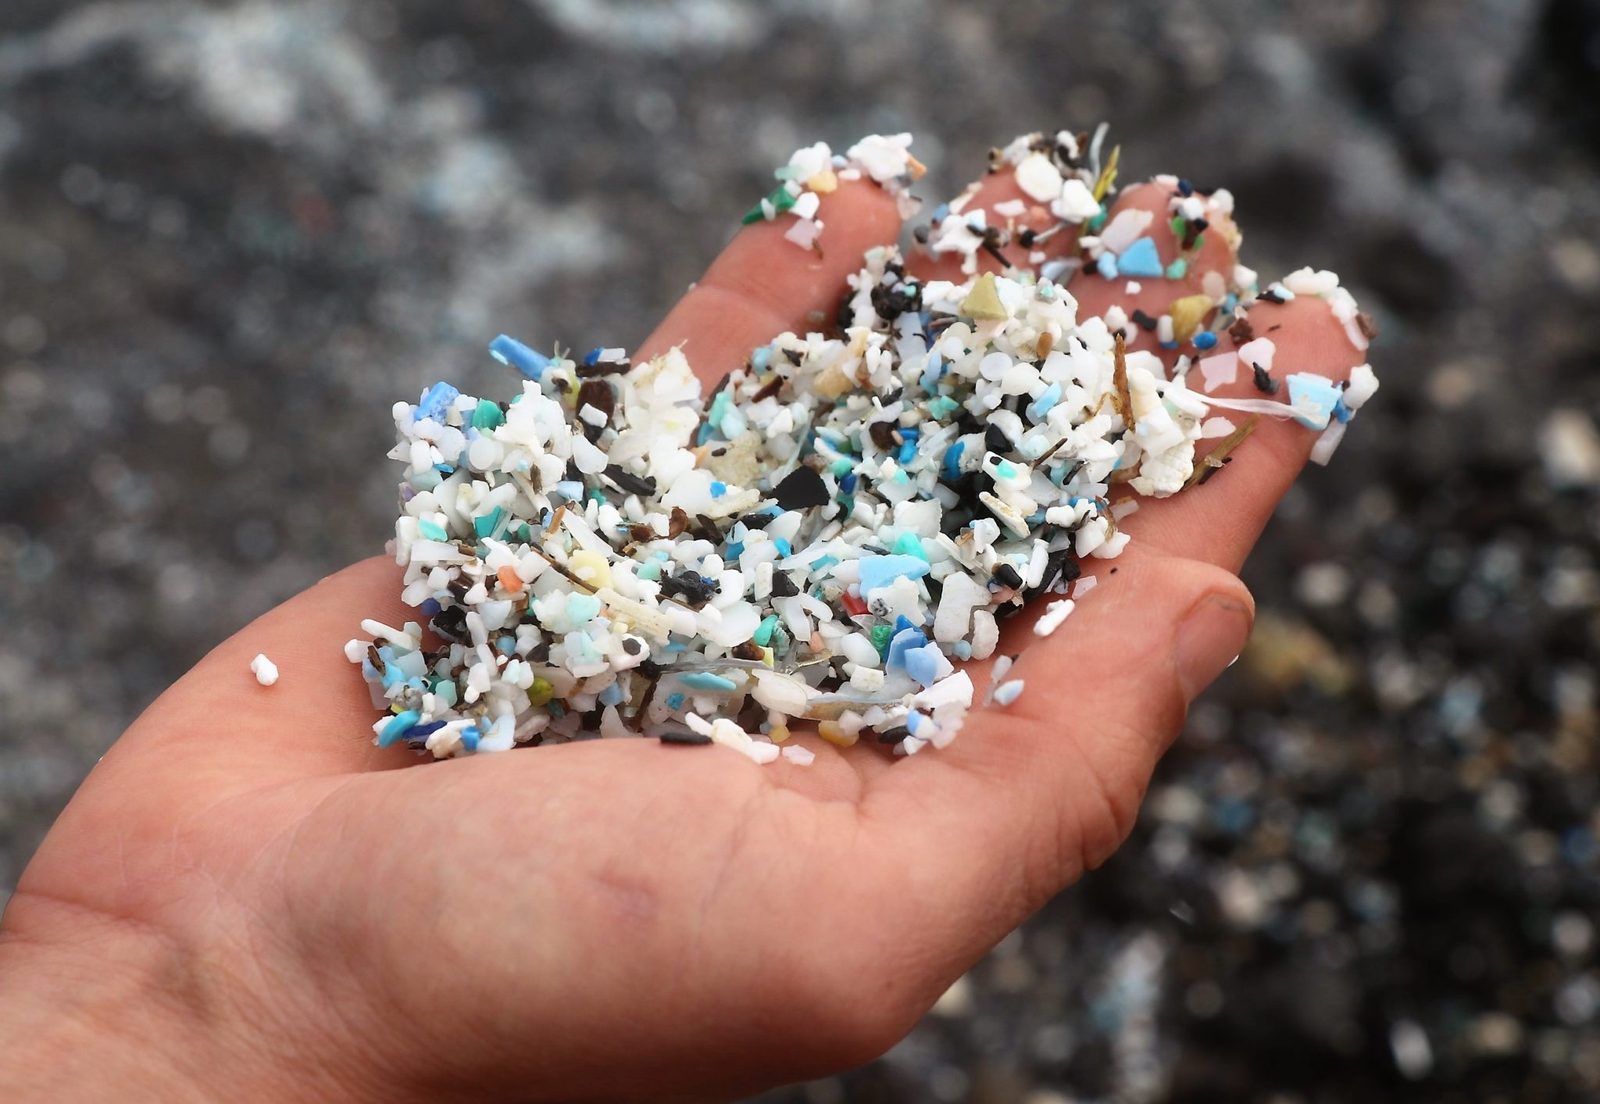 Microplastics+are+everywhere.++Here%26%238217%3Bs+how+to+avoid+eating+them.